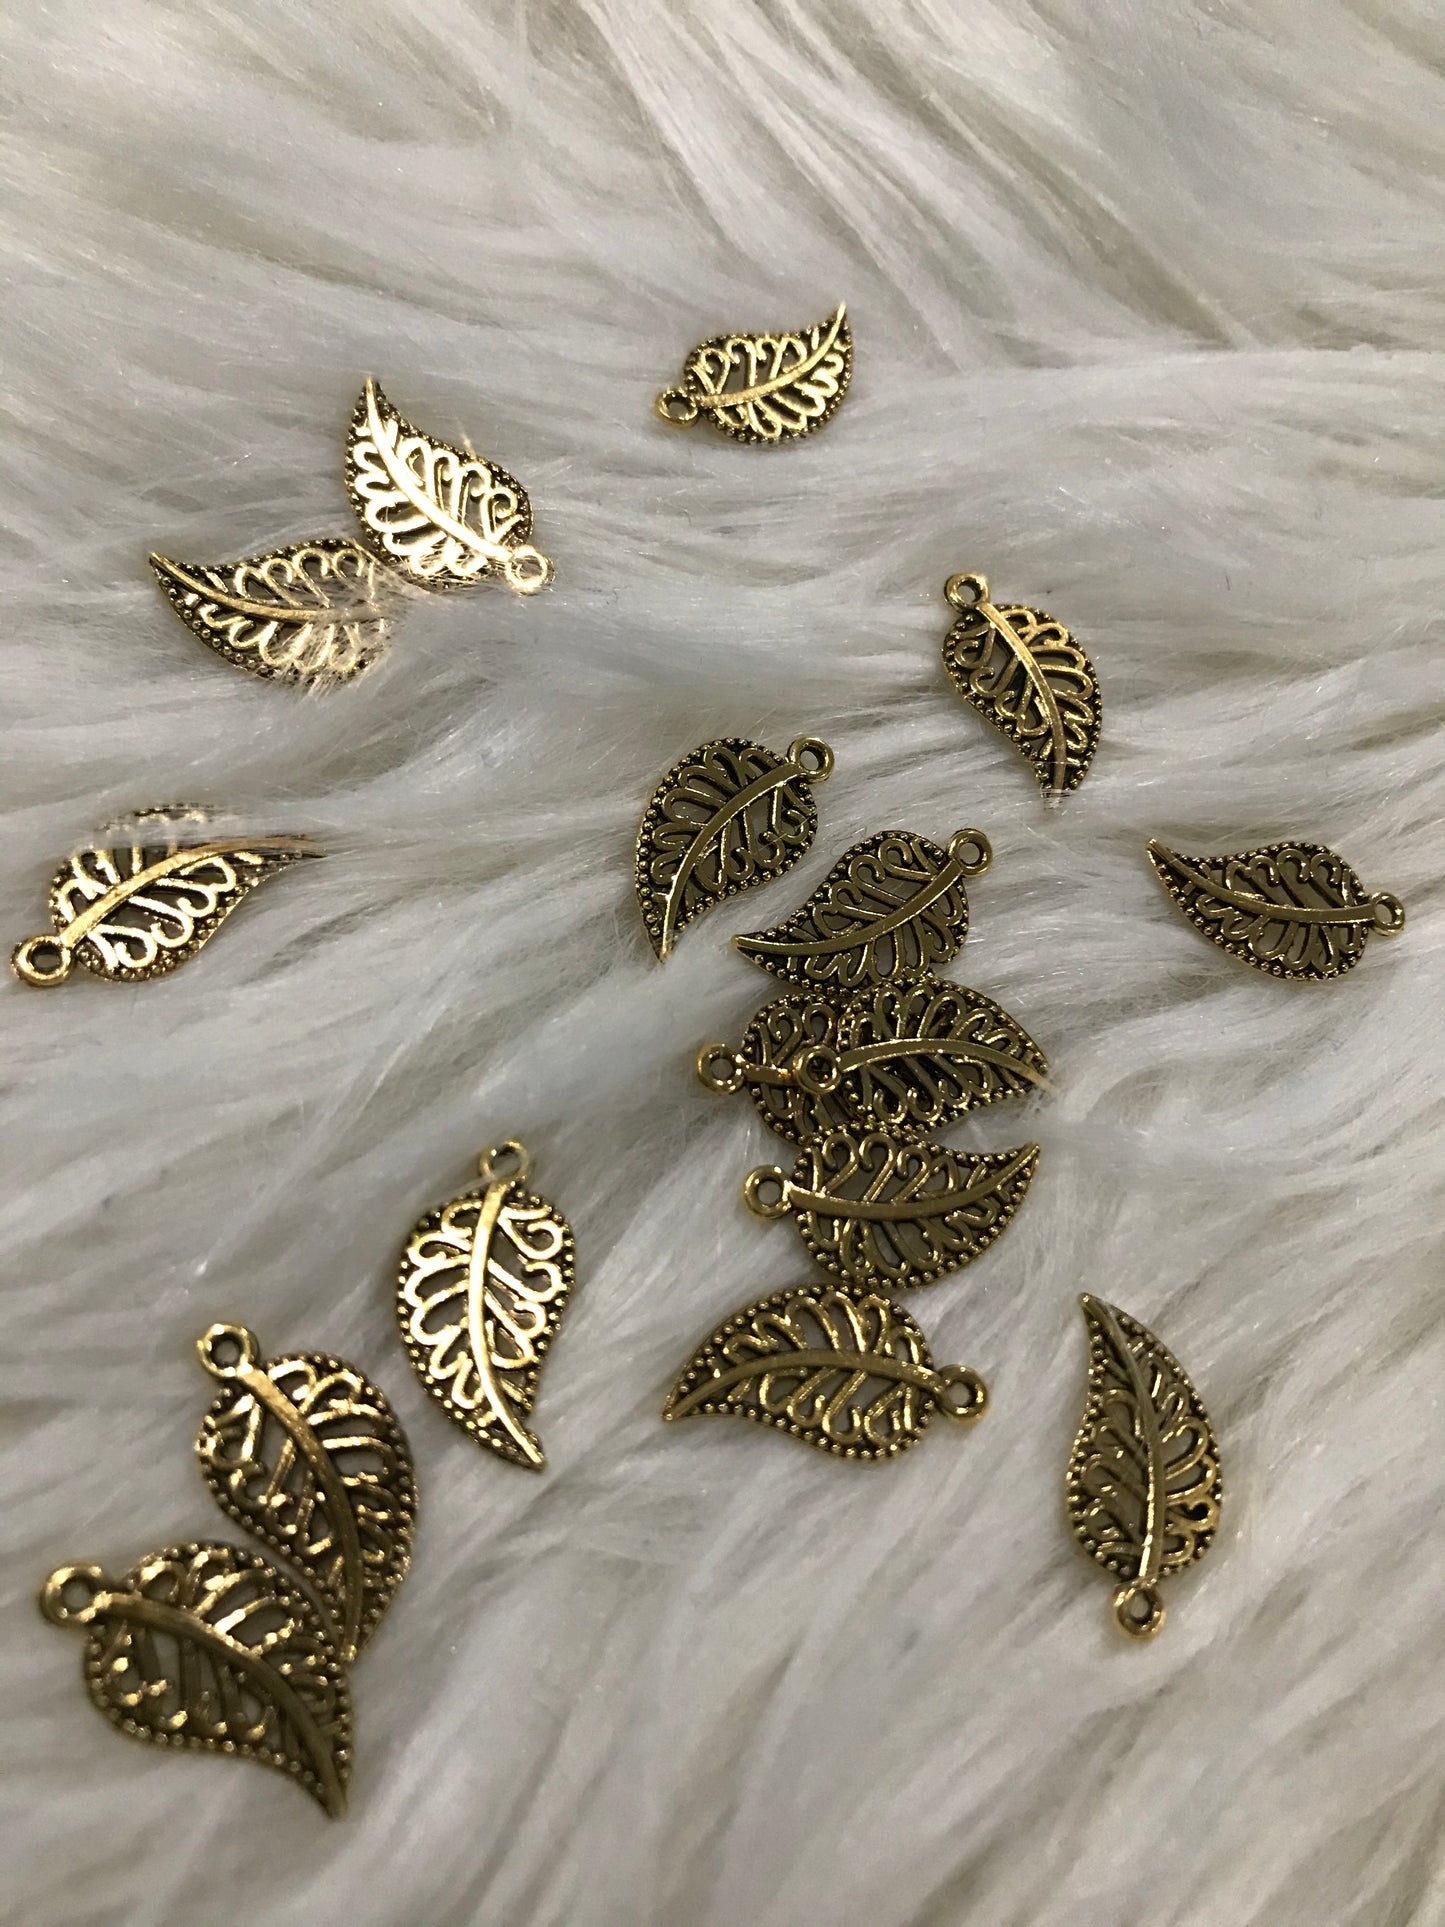 Mini Leaf Charms or zipper pull - 5 colors available - Retail left from PP5